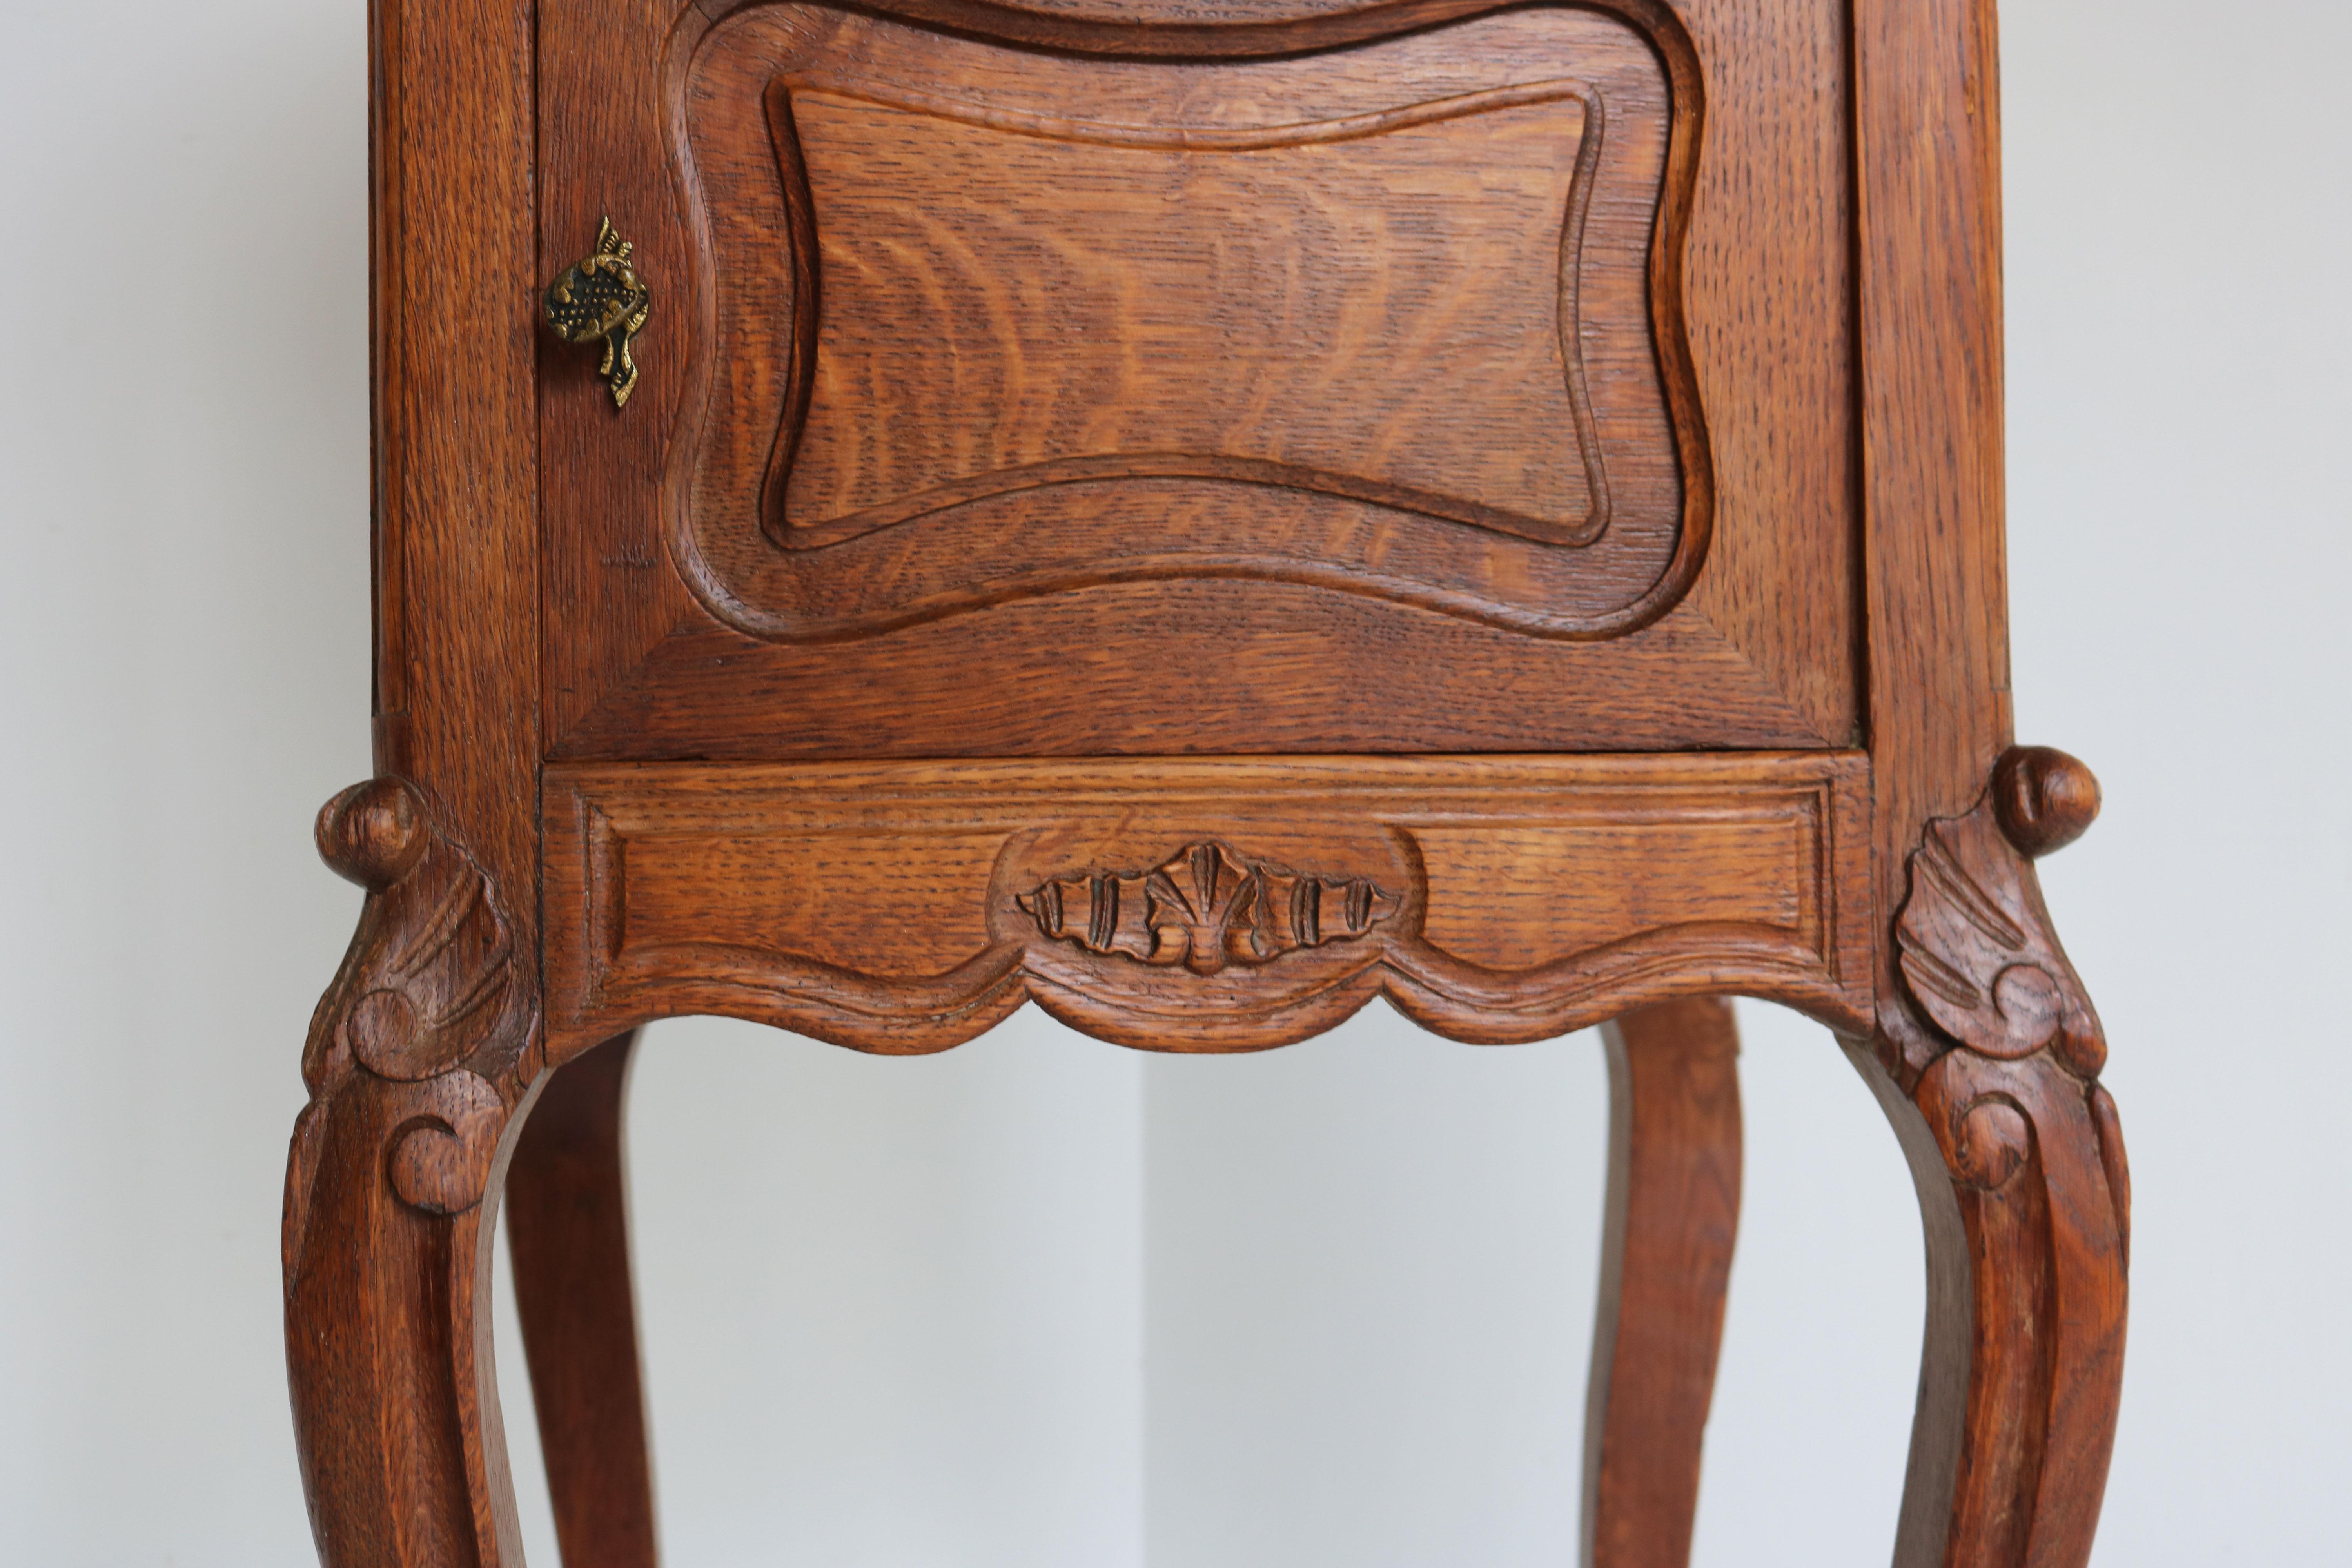 Gorgeous antique French Louis XV nightstand 19th century. 
Nice quality solid oak hand-carved amazing craftsmanship , finished on all sides so you are able to place it free standing. 
Lovely Italian Carrara marble top with nicely carved edges. The